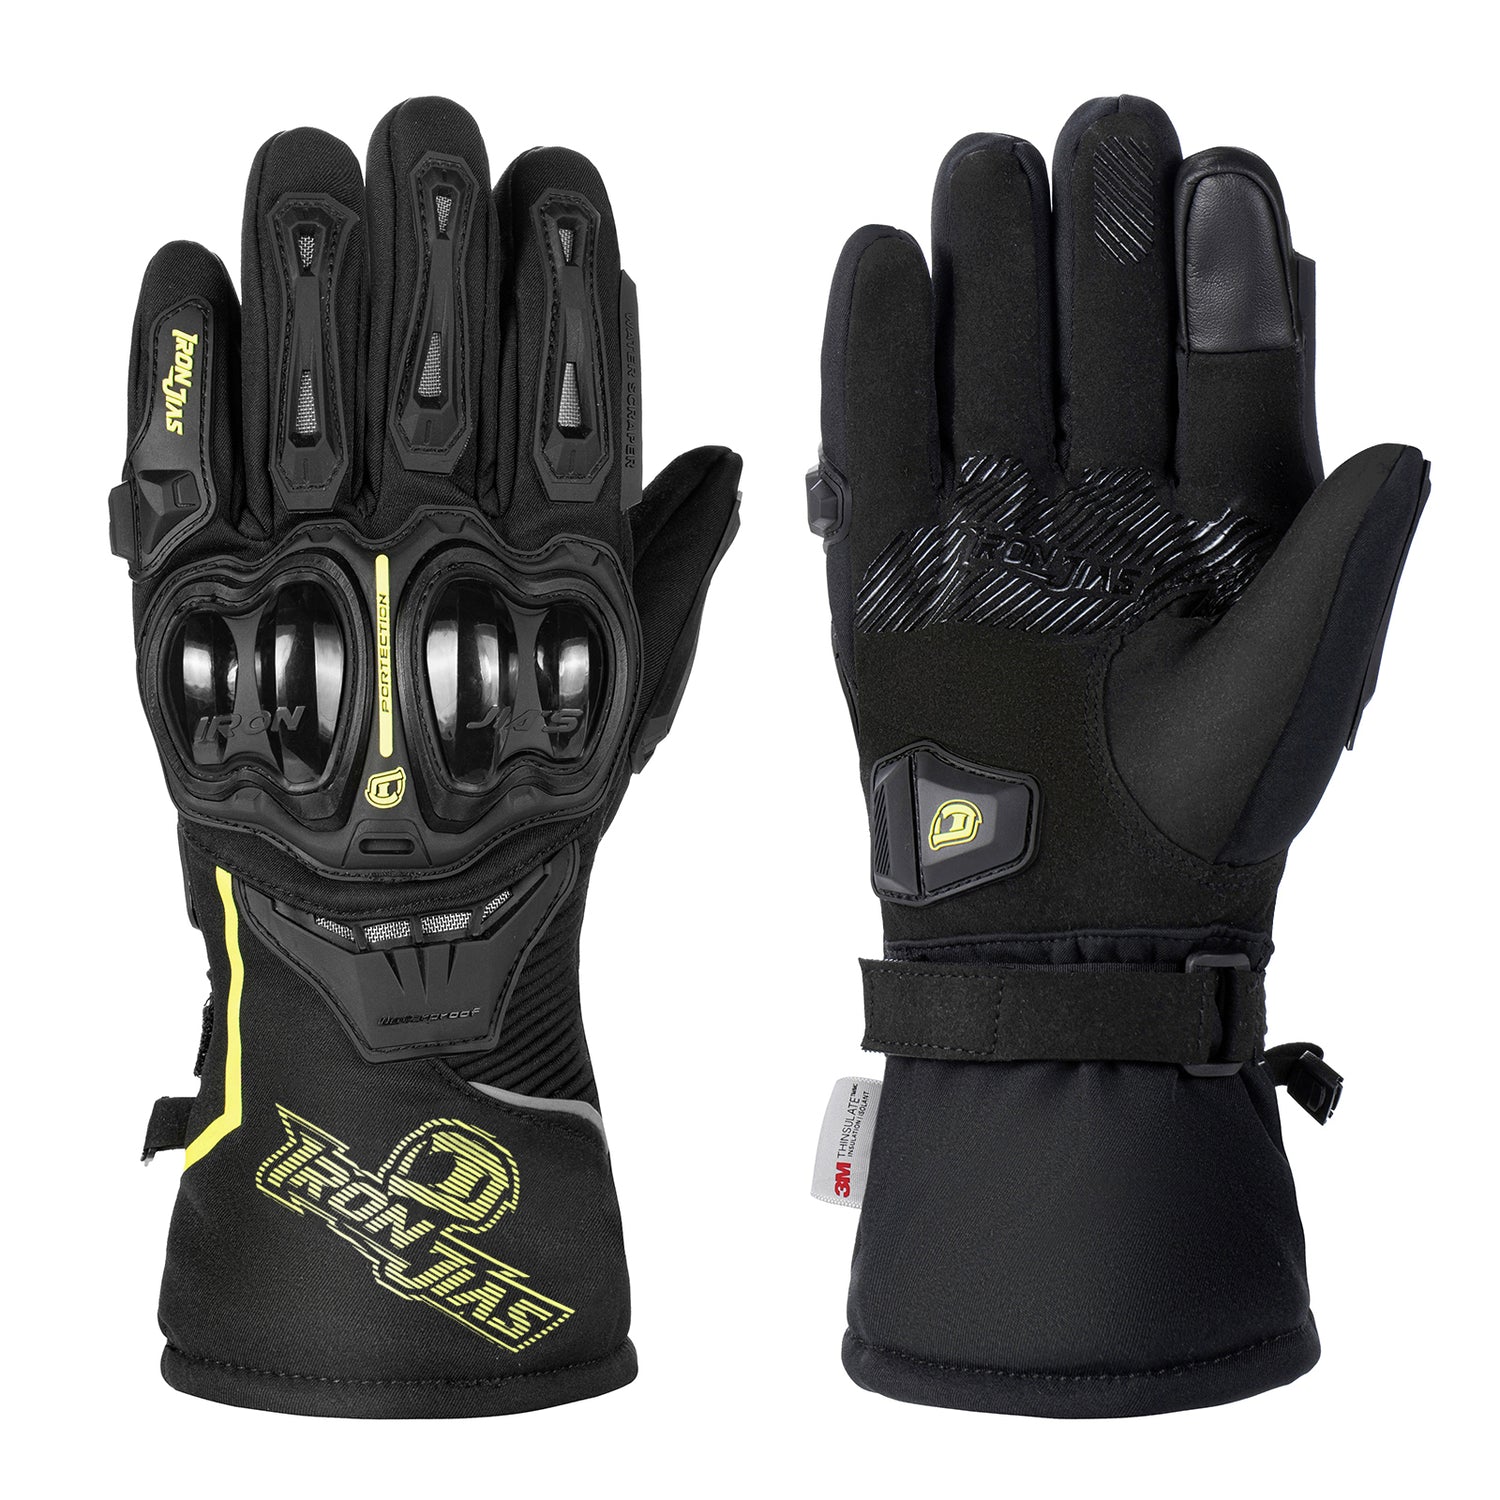  IRON JIA'S Motorcycle Gloves Winter Cold Weather Warm  Touchscreen Waterproof Windproof Protective Gear (Black, XL) : Automotive